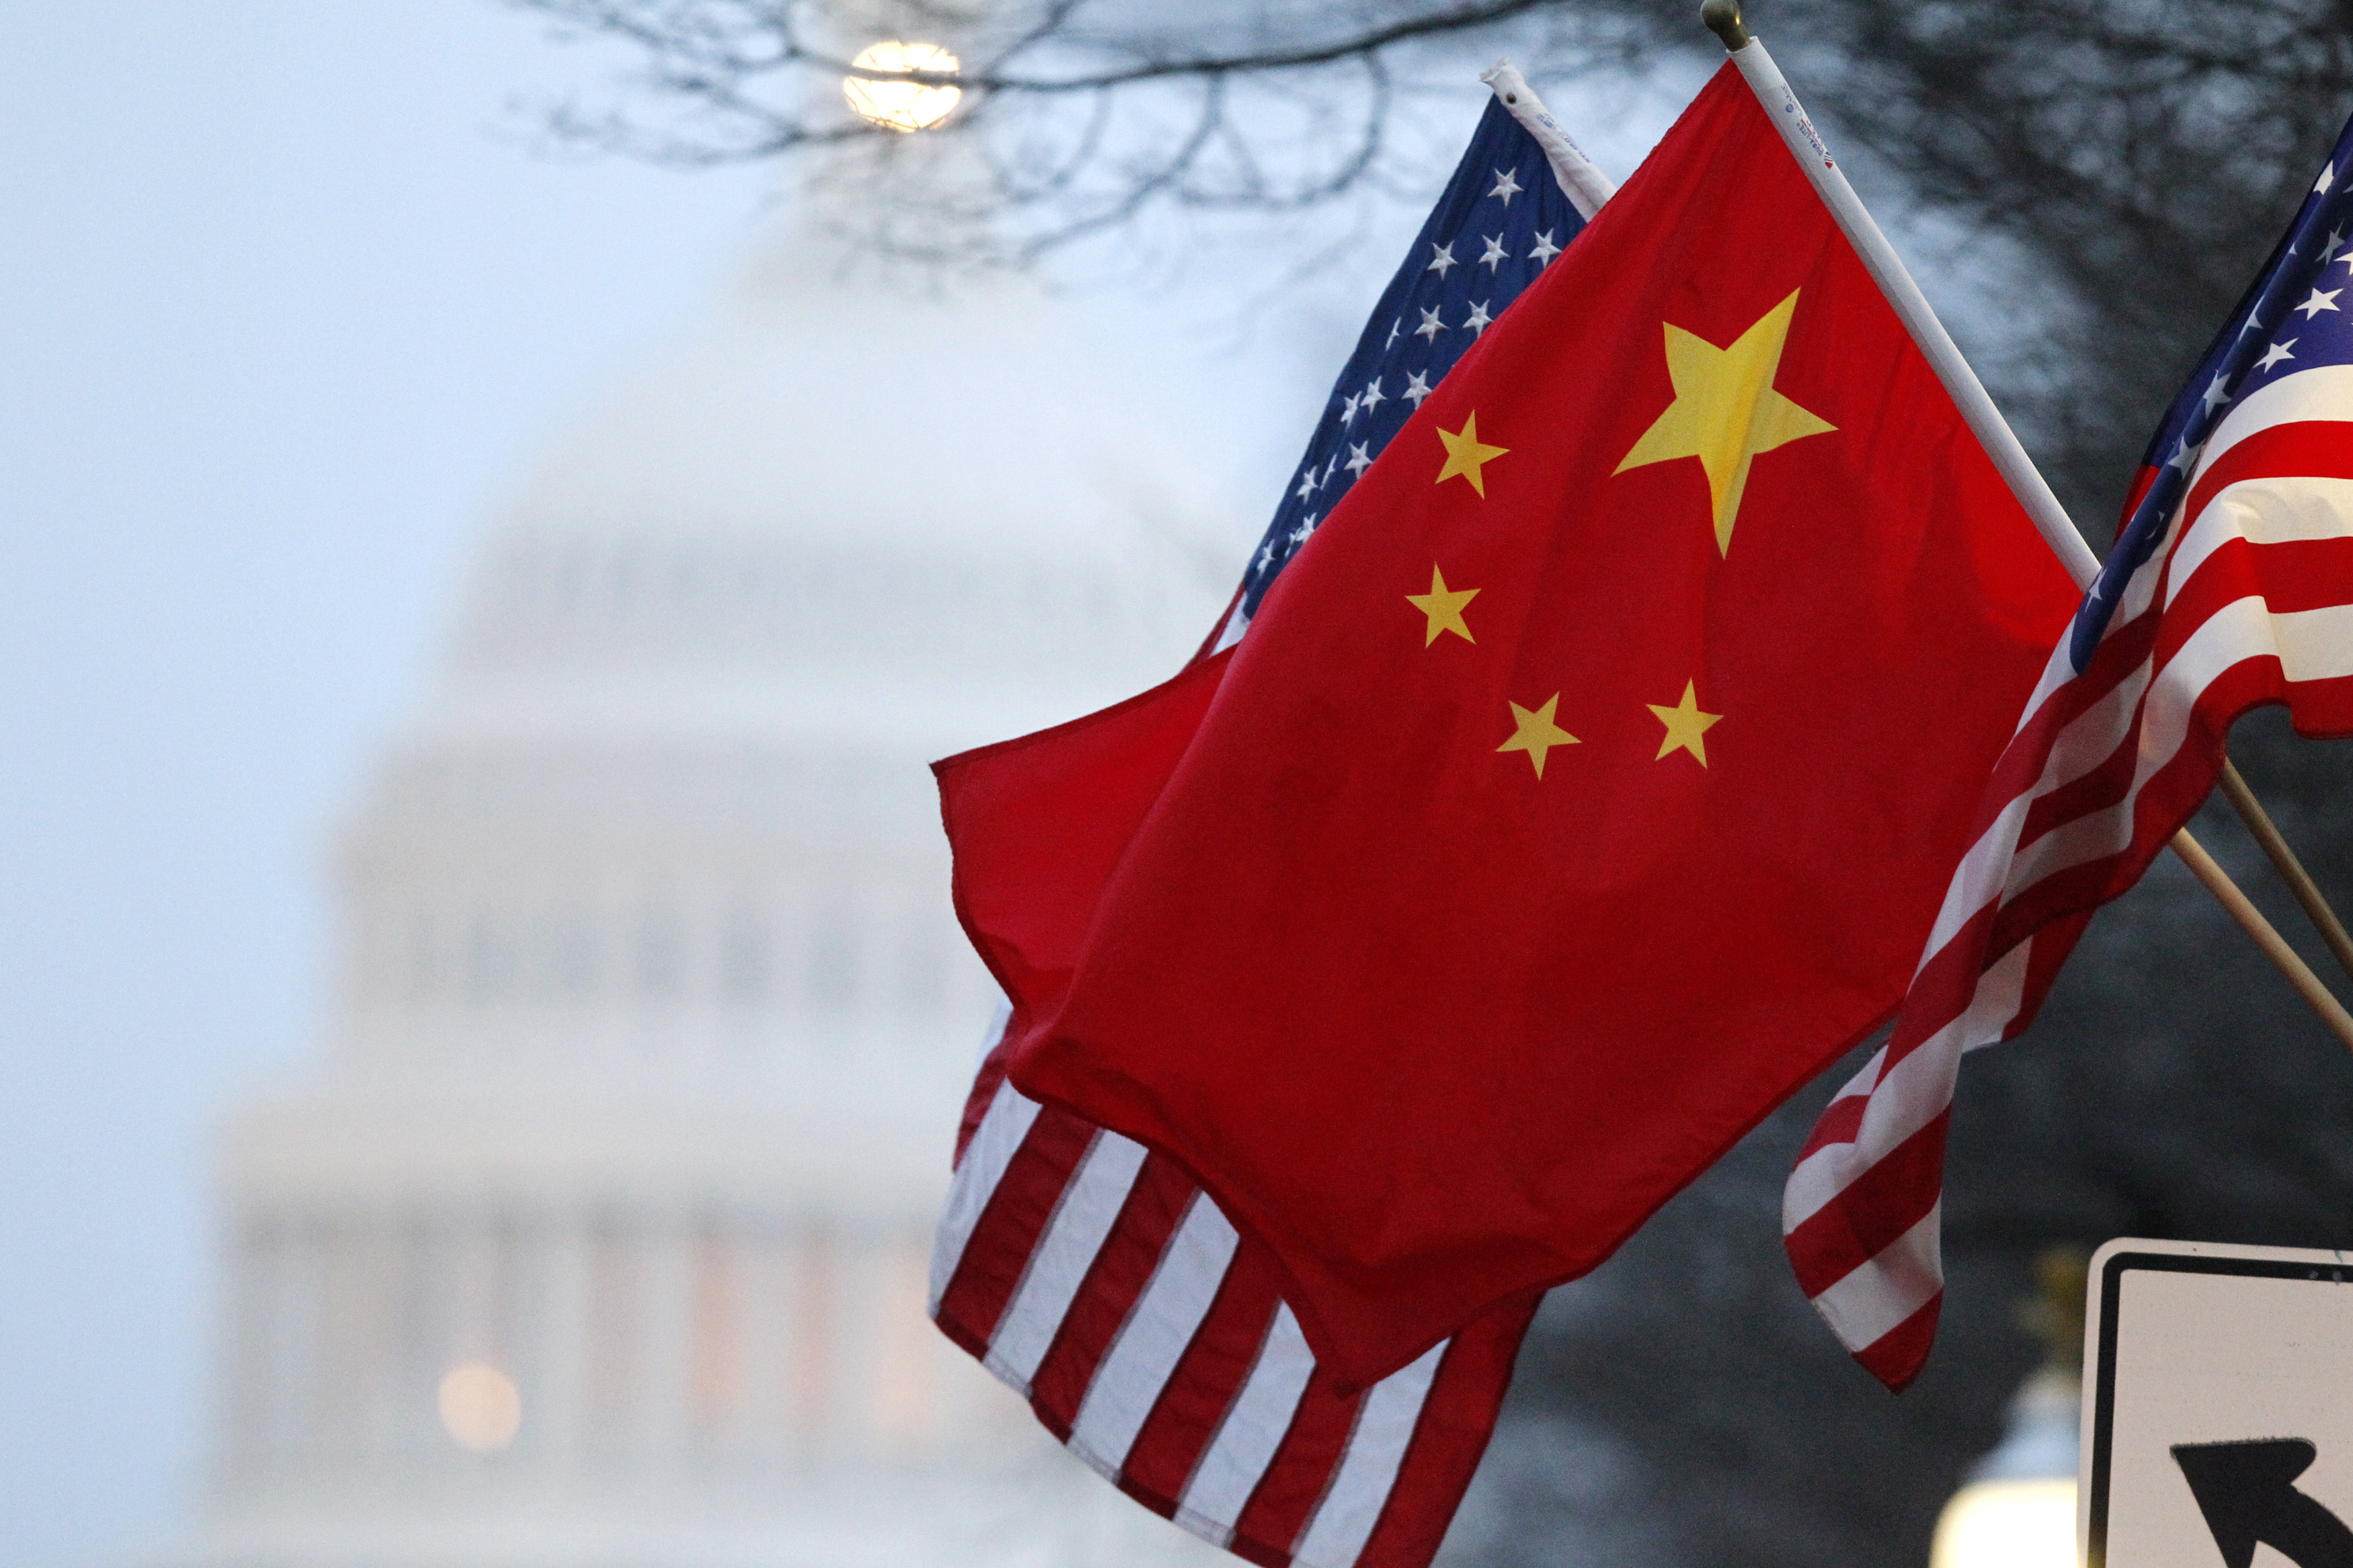 The People's Republic of China flag and the U.S. Stars and Stripes fly along Pennsylvania Avenue near the U.S. Capitol in Washington